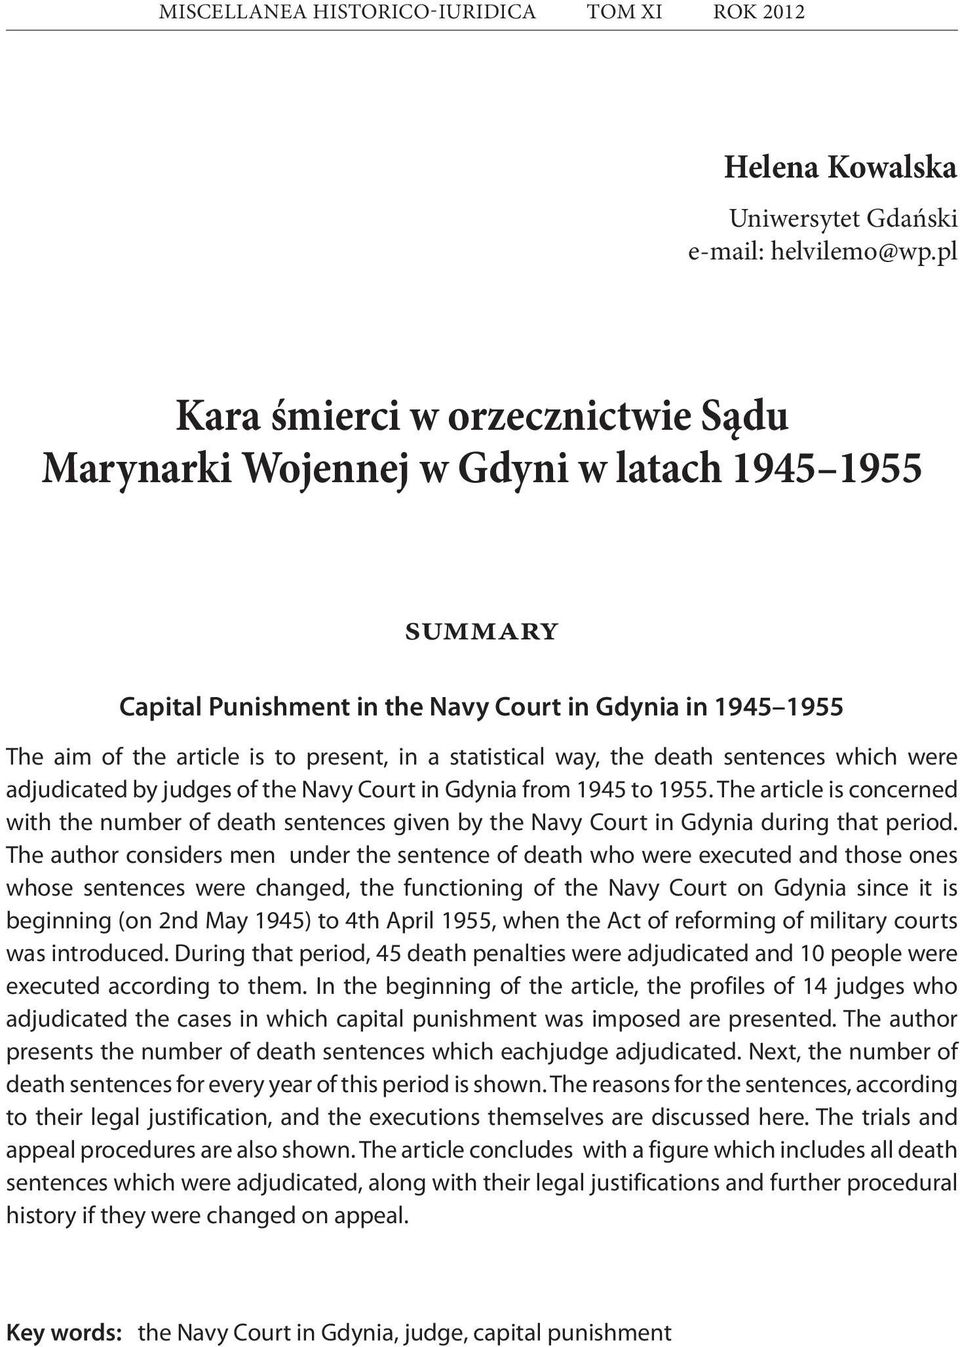 statistical way, the death sentences which were adjudicated by judges of the Navy Court in Gdynia from 1945 to 1955.